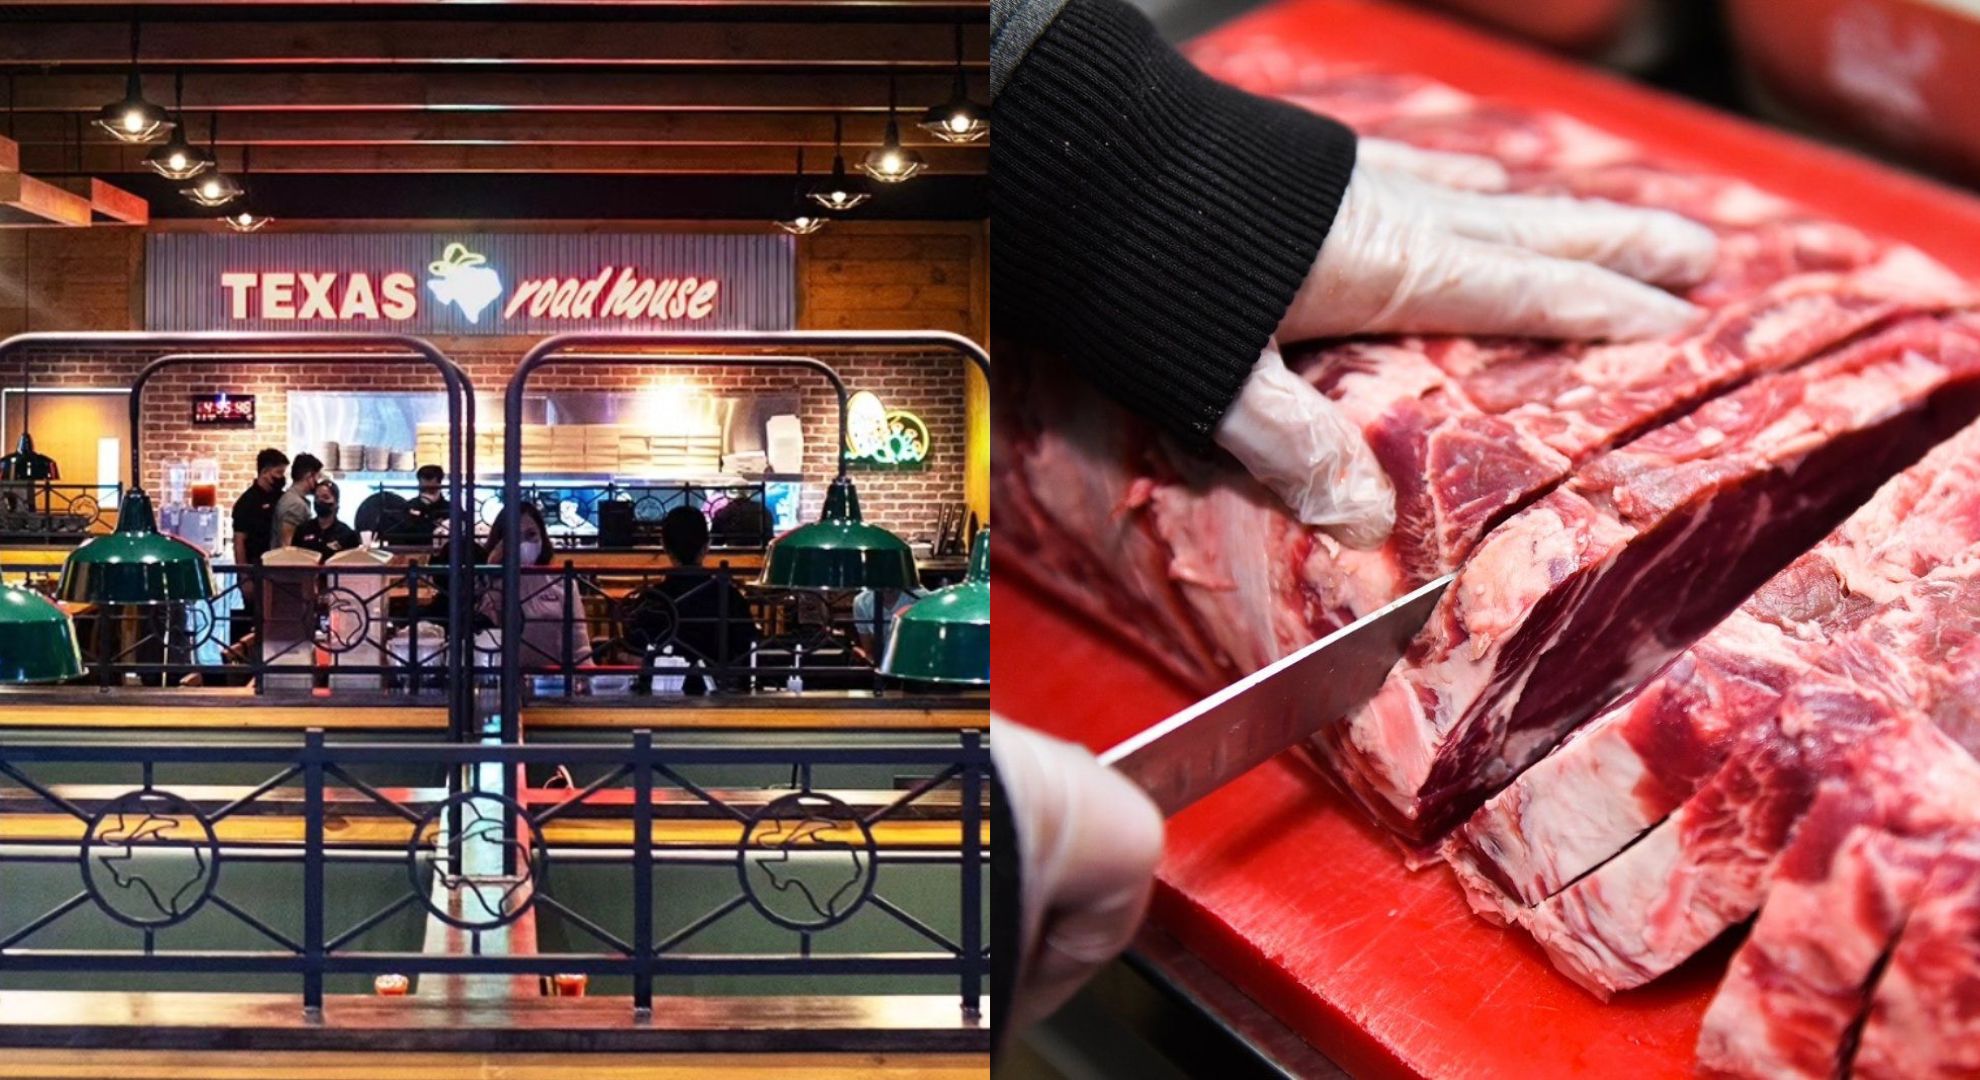 Texas Roadhouse holds meat cutters qualifier competition on December 7